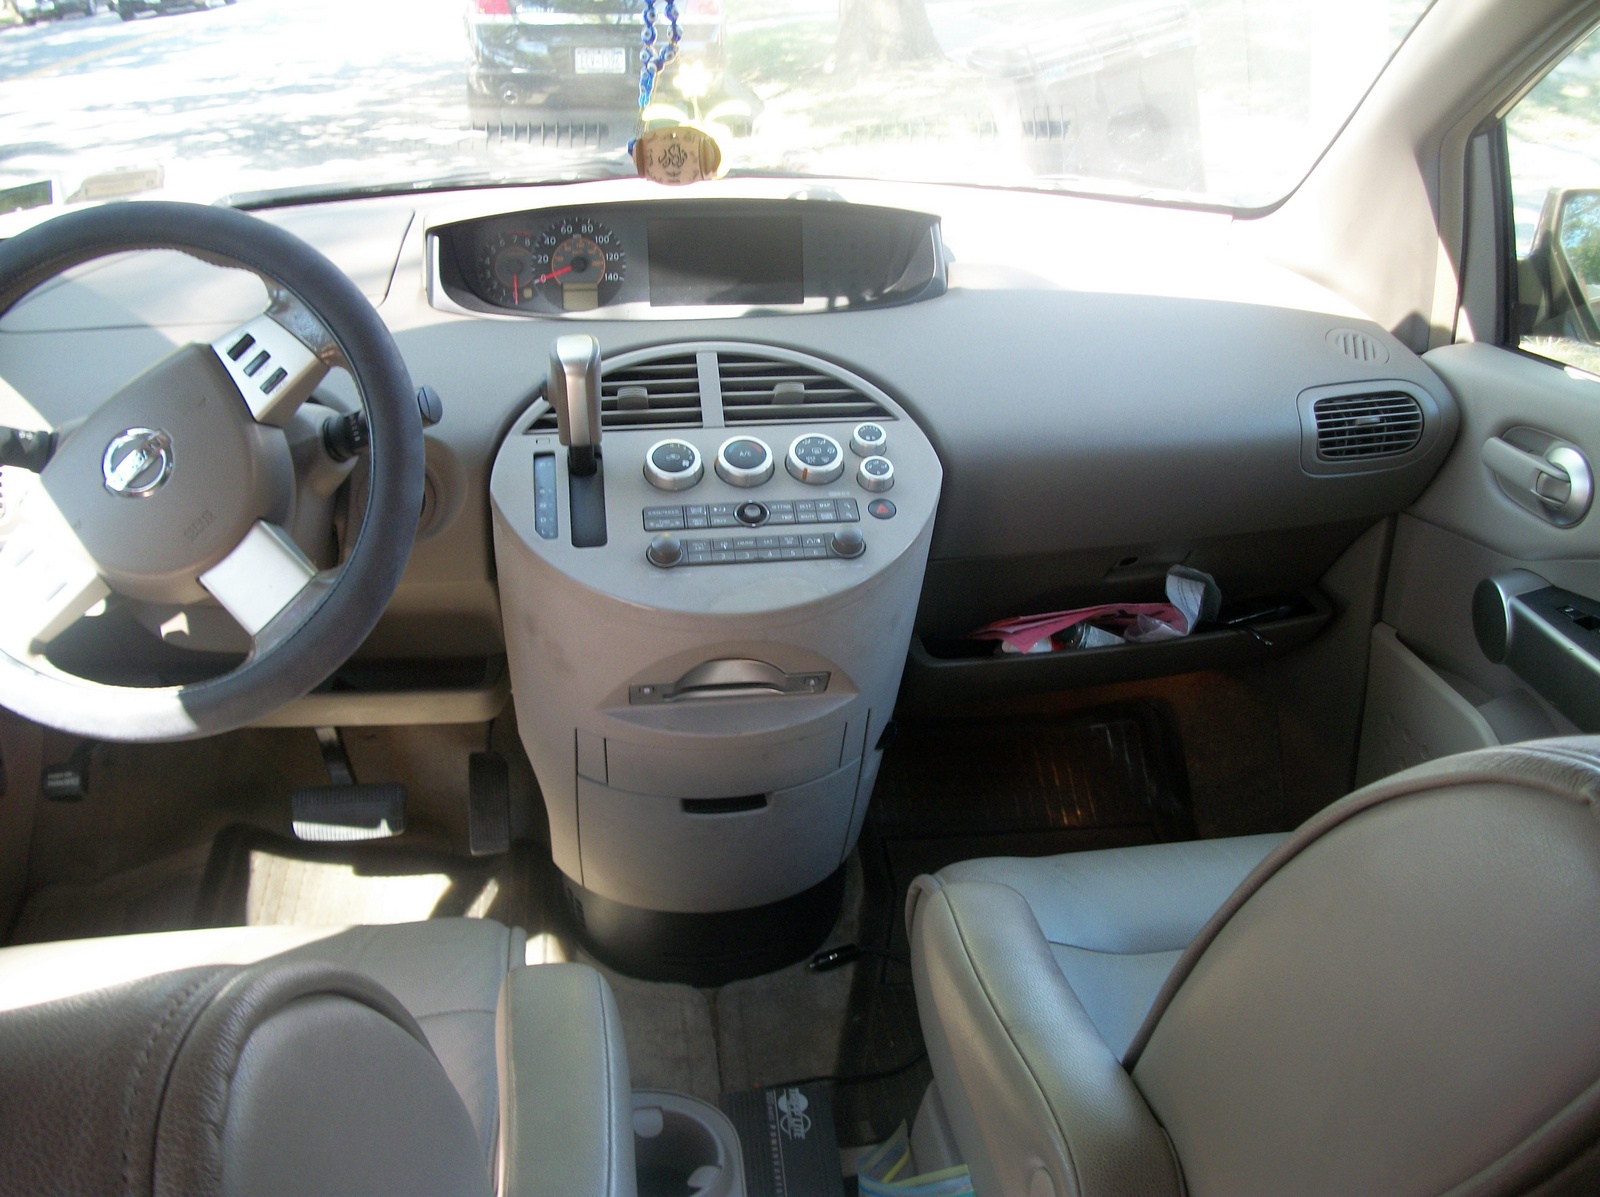 Reviews of 2009 nissan quest